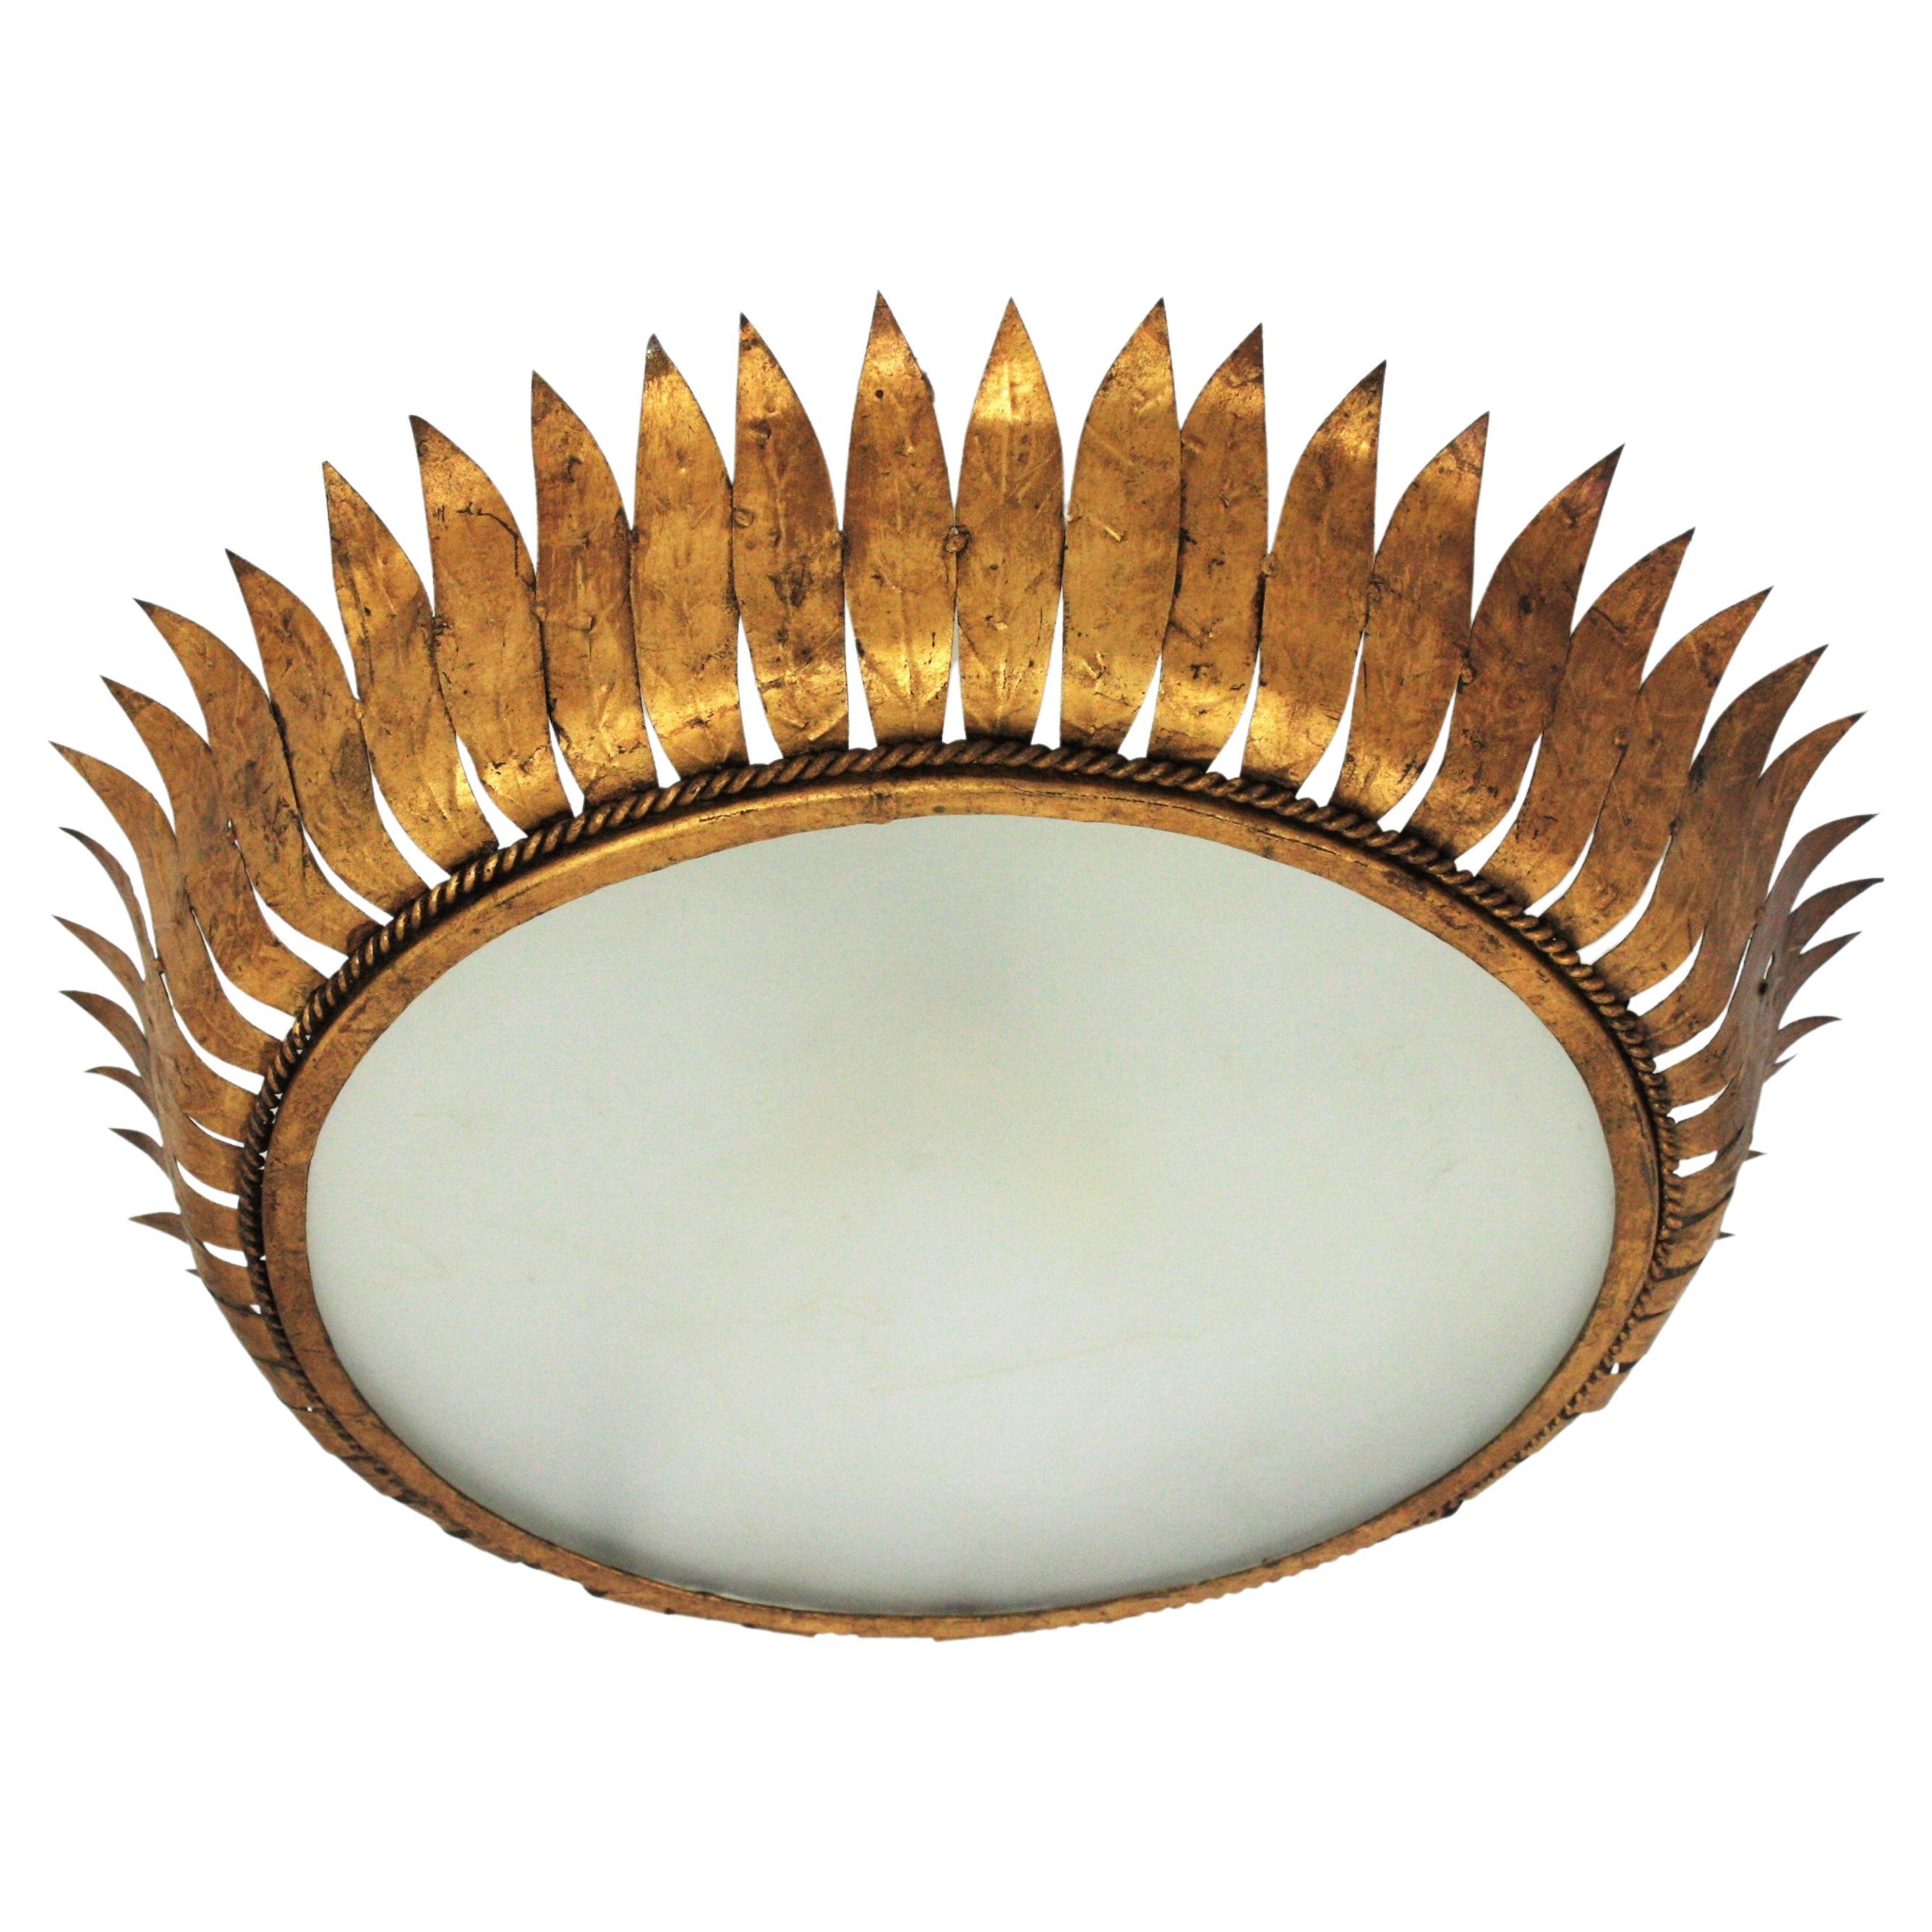 Large spanish gilt Metal crown sunburst leafed light fixture with Frosted Glass, Spain, 1950s.
Mid-Century Modern gilt iron crown sunburst flush mount or pendant with leaf motifs surrounding a central frosted glass diffuser. Handcrafted in hammered